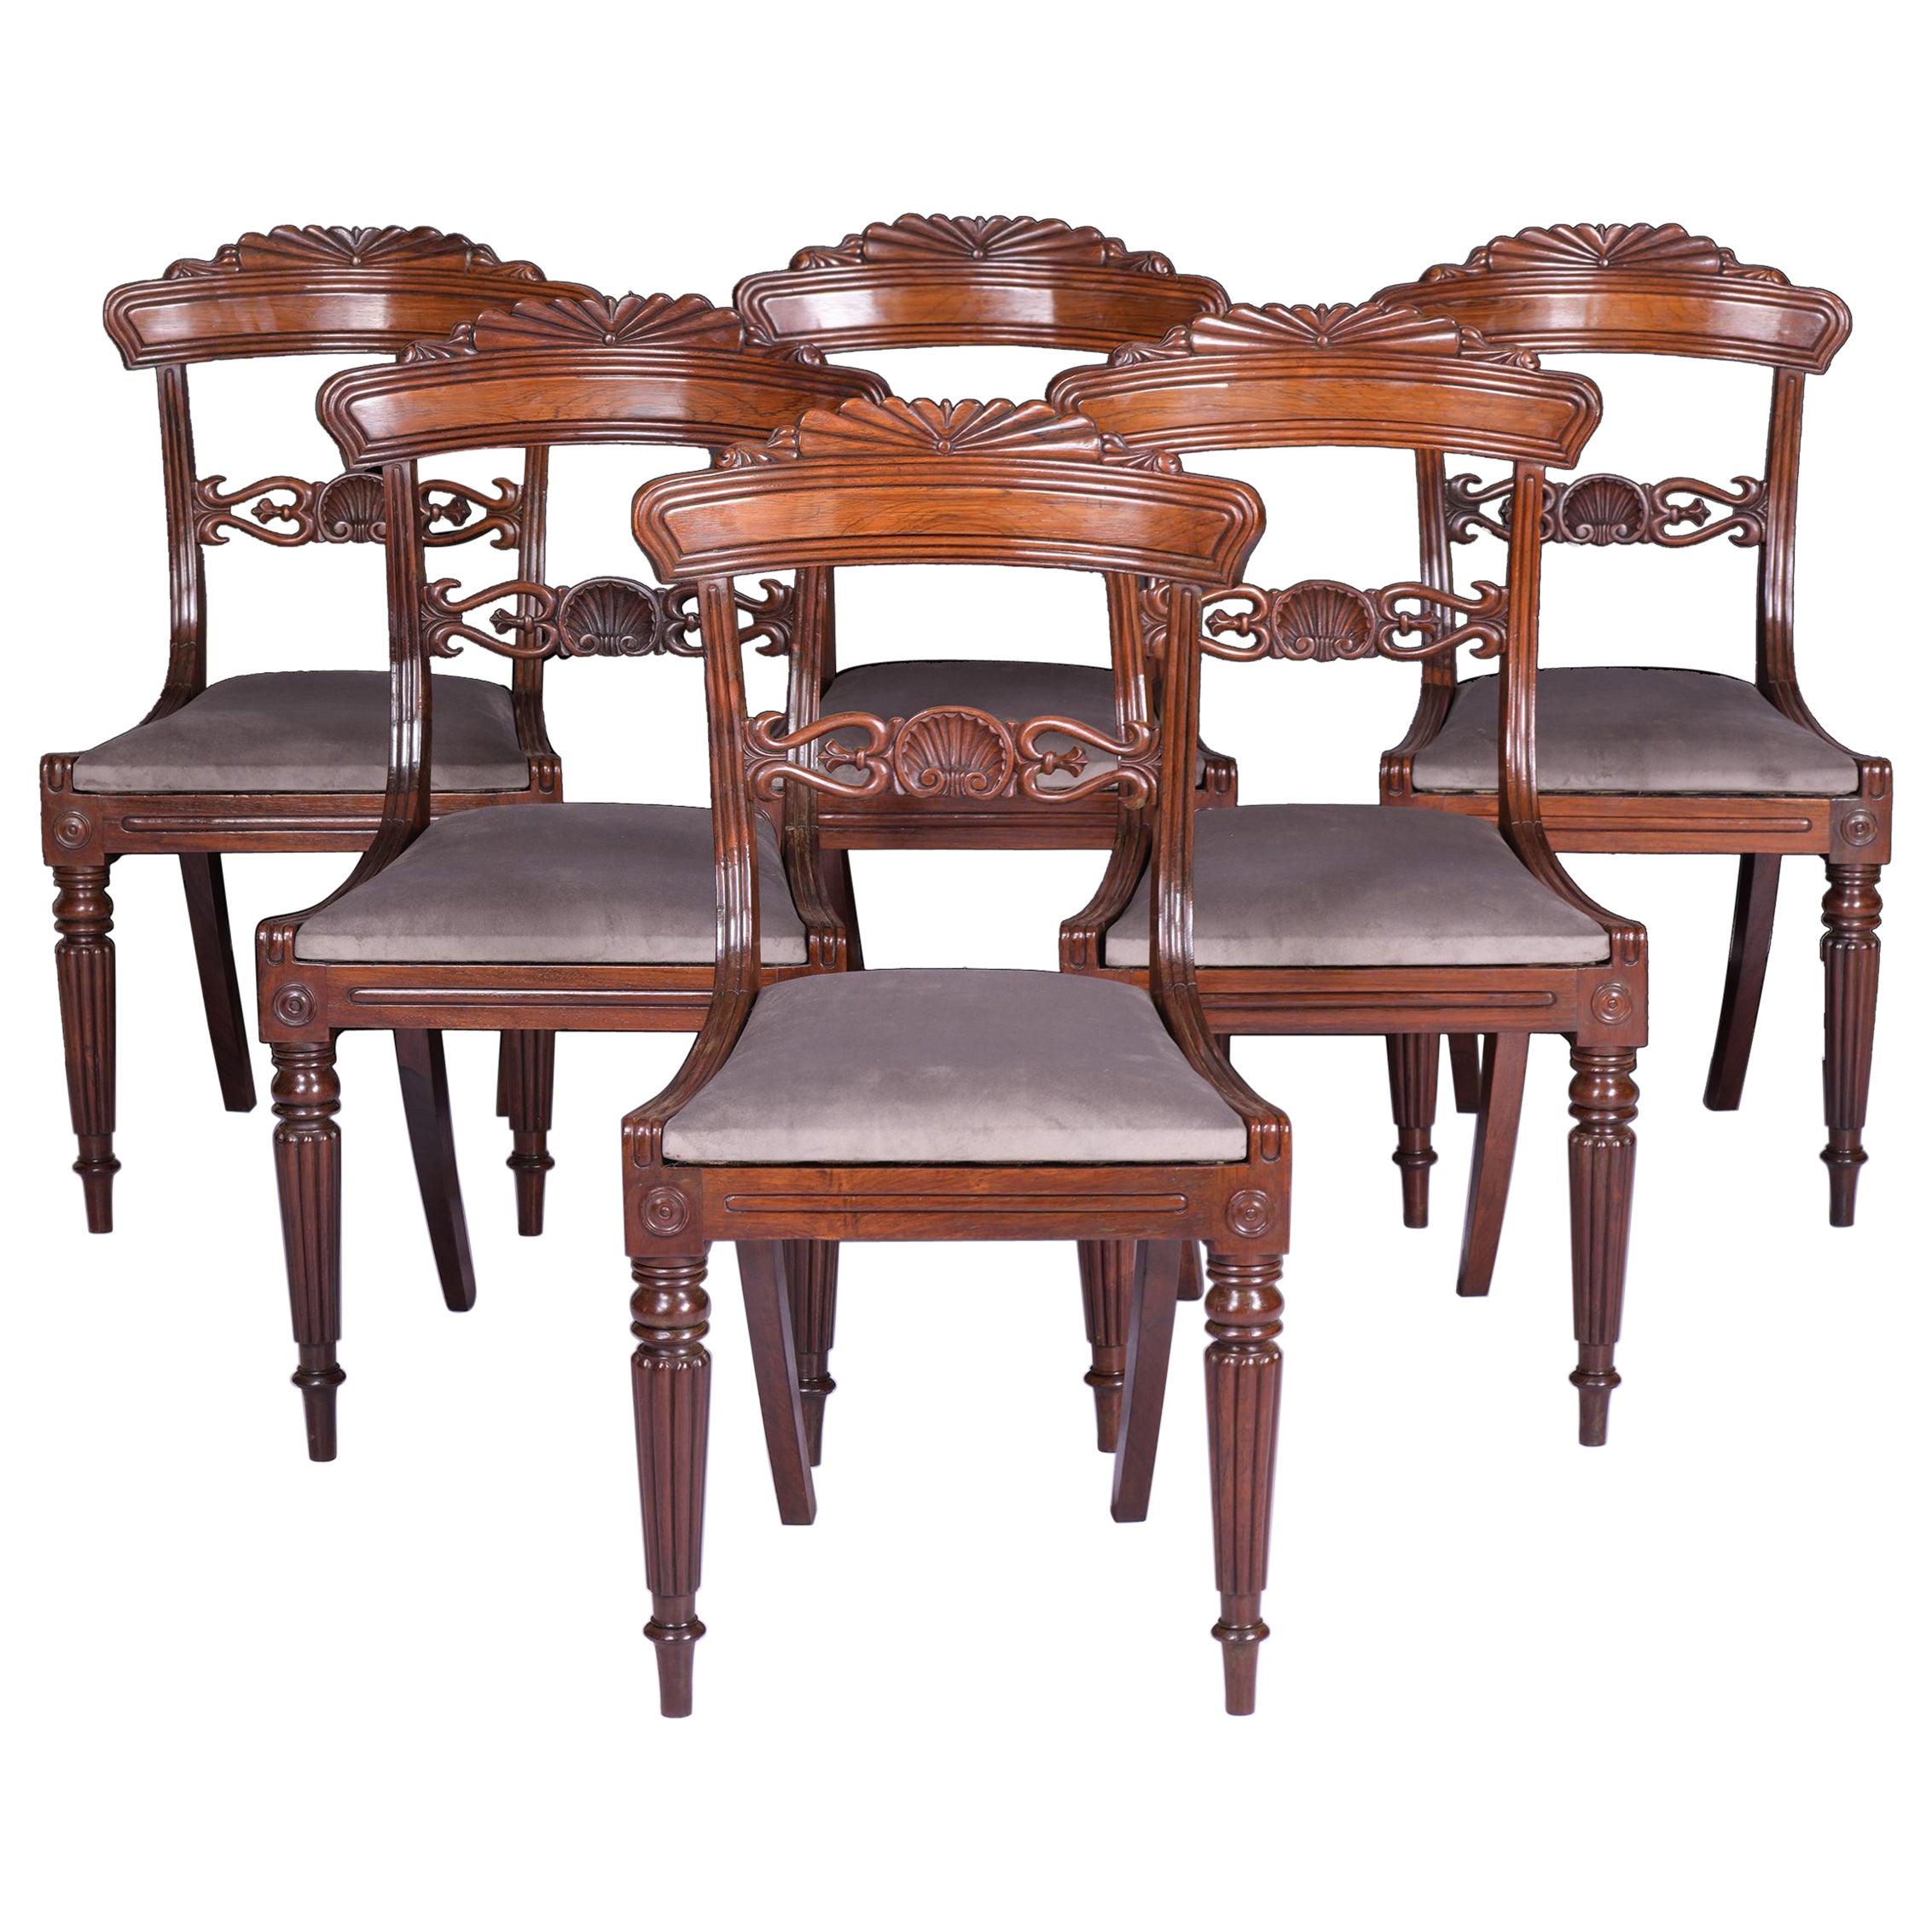 Set Of 6 Early 19th Century English Regency Chairs Attributed To Gillows  For Sale